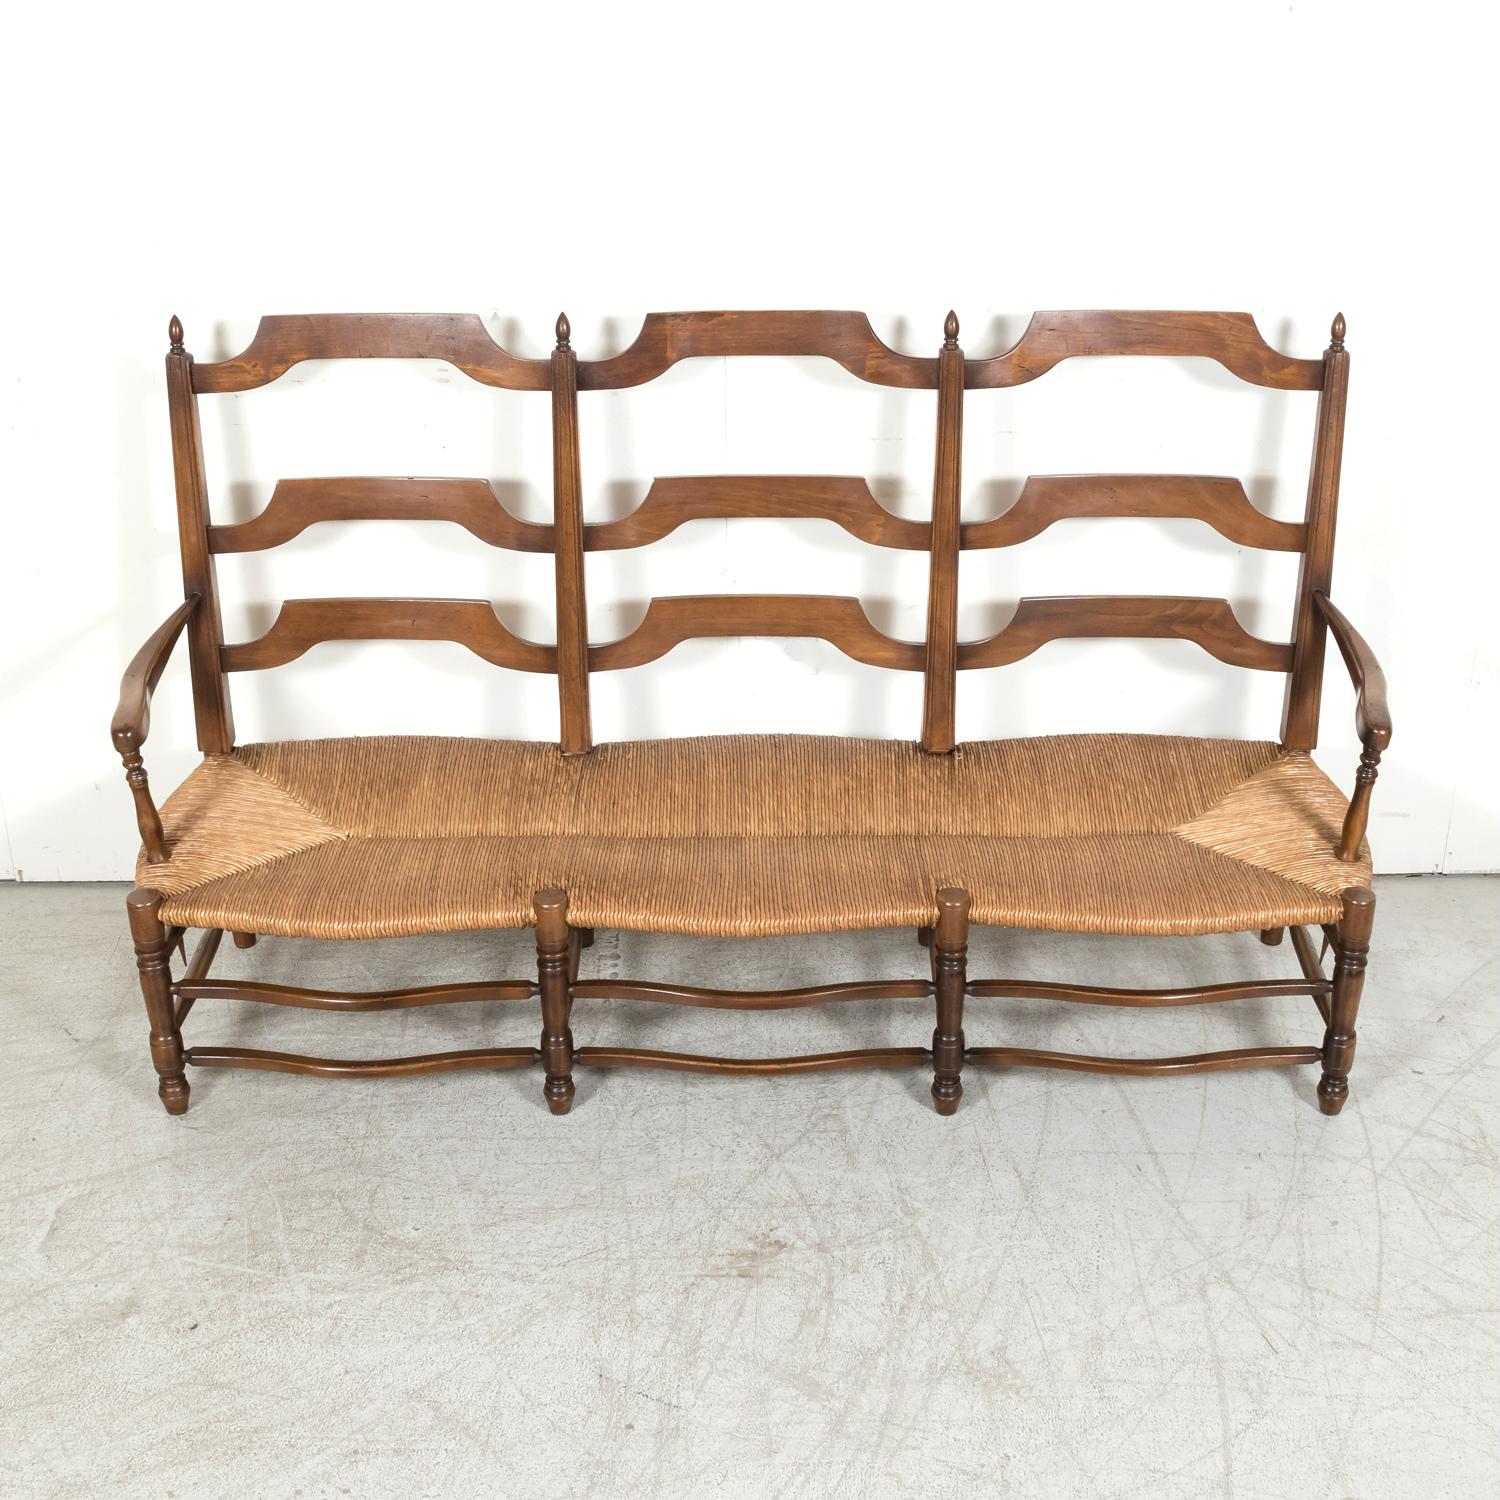 Antique Country French Walnut Ladder Back Settee or Radassier with Rush Seat In Good Condition For Sale In Birmingham, AL